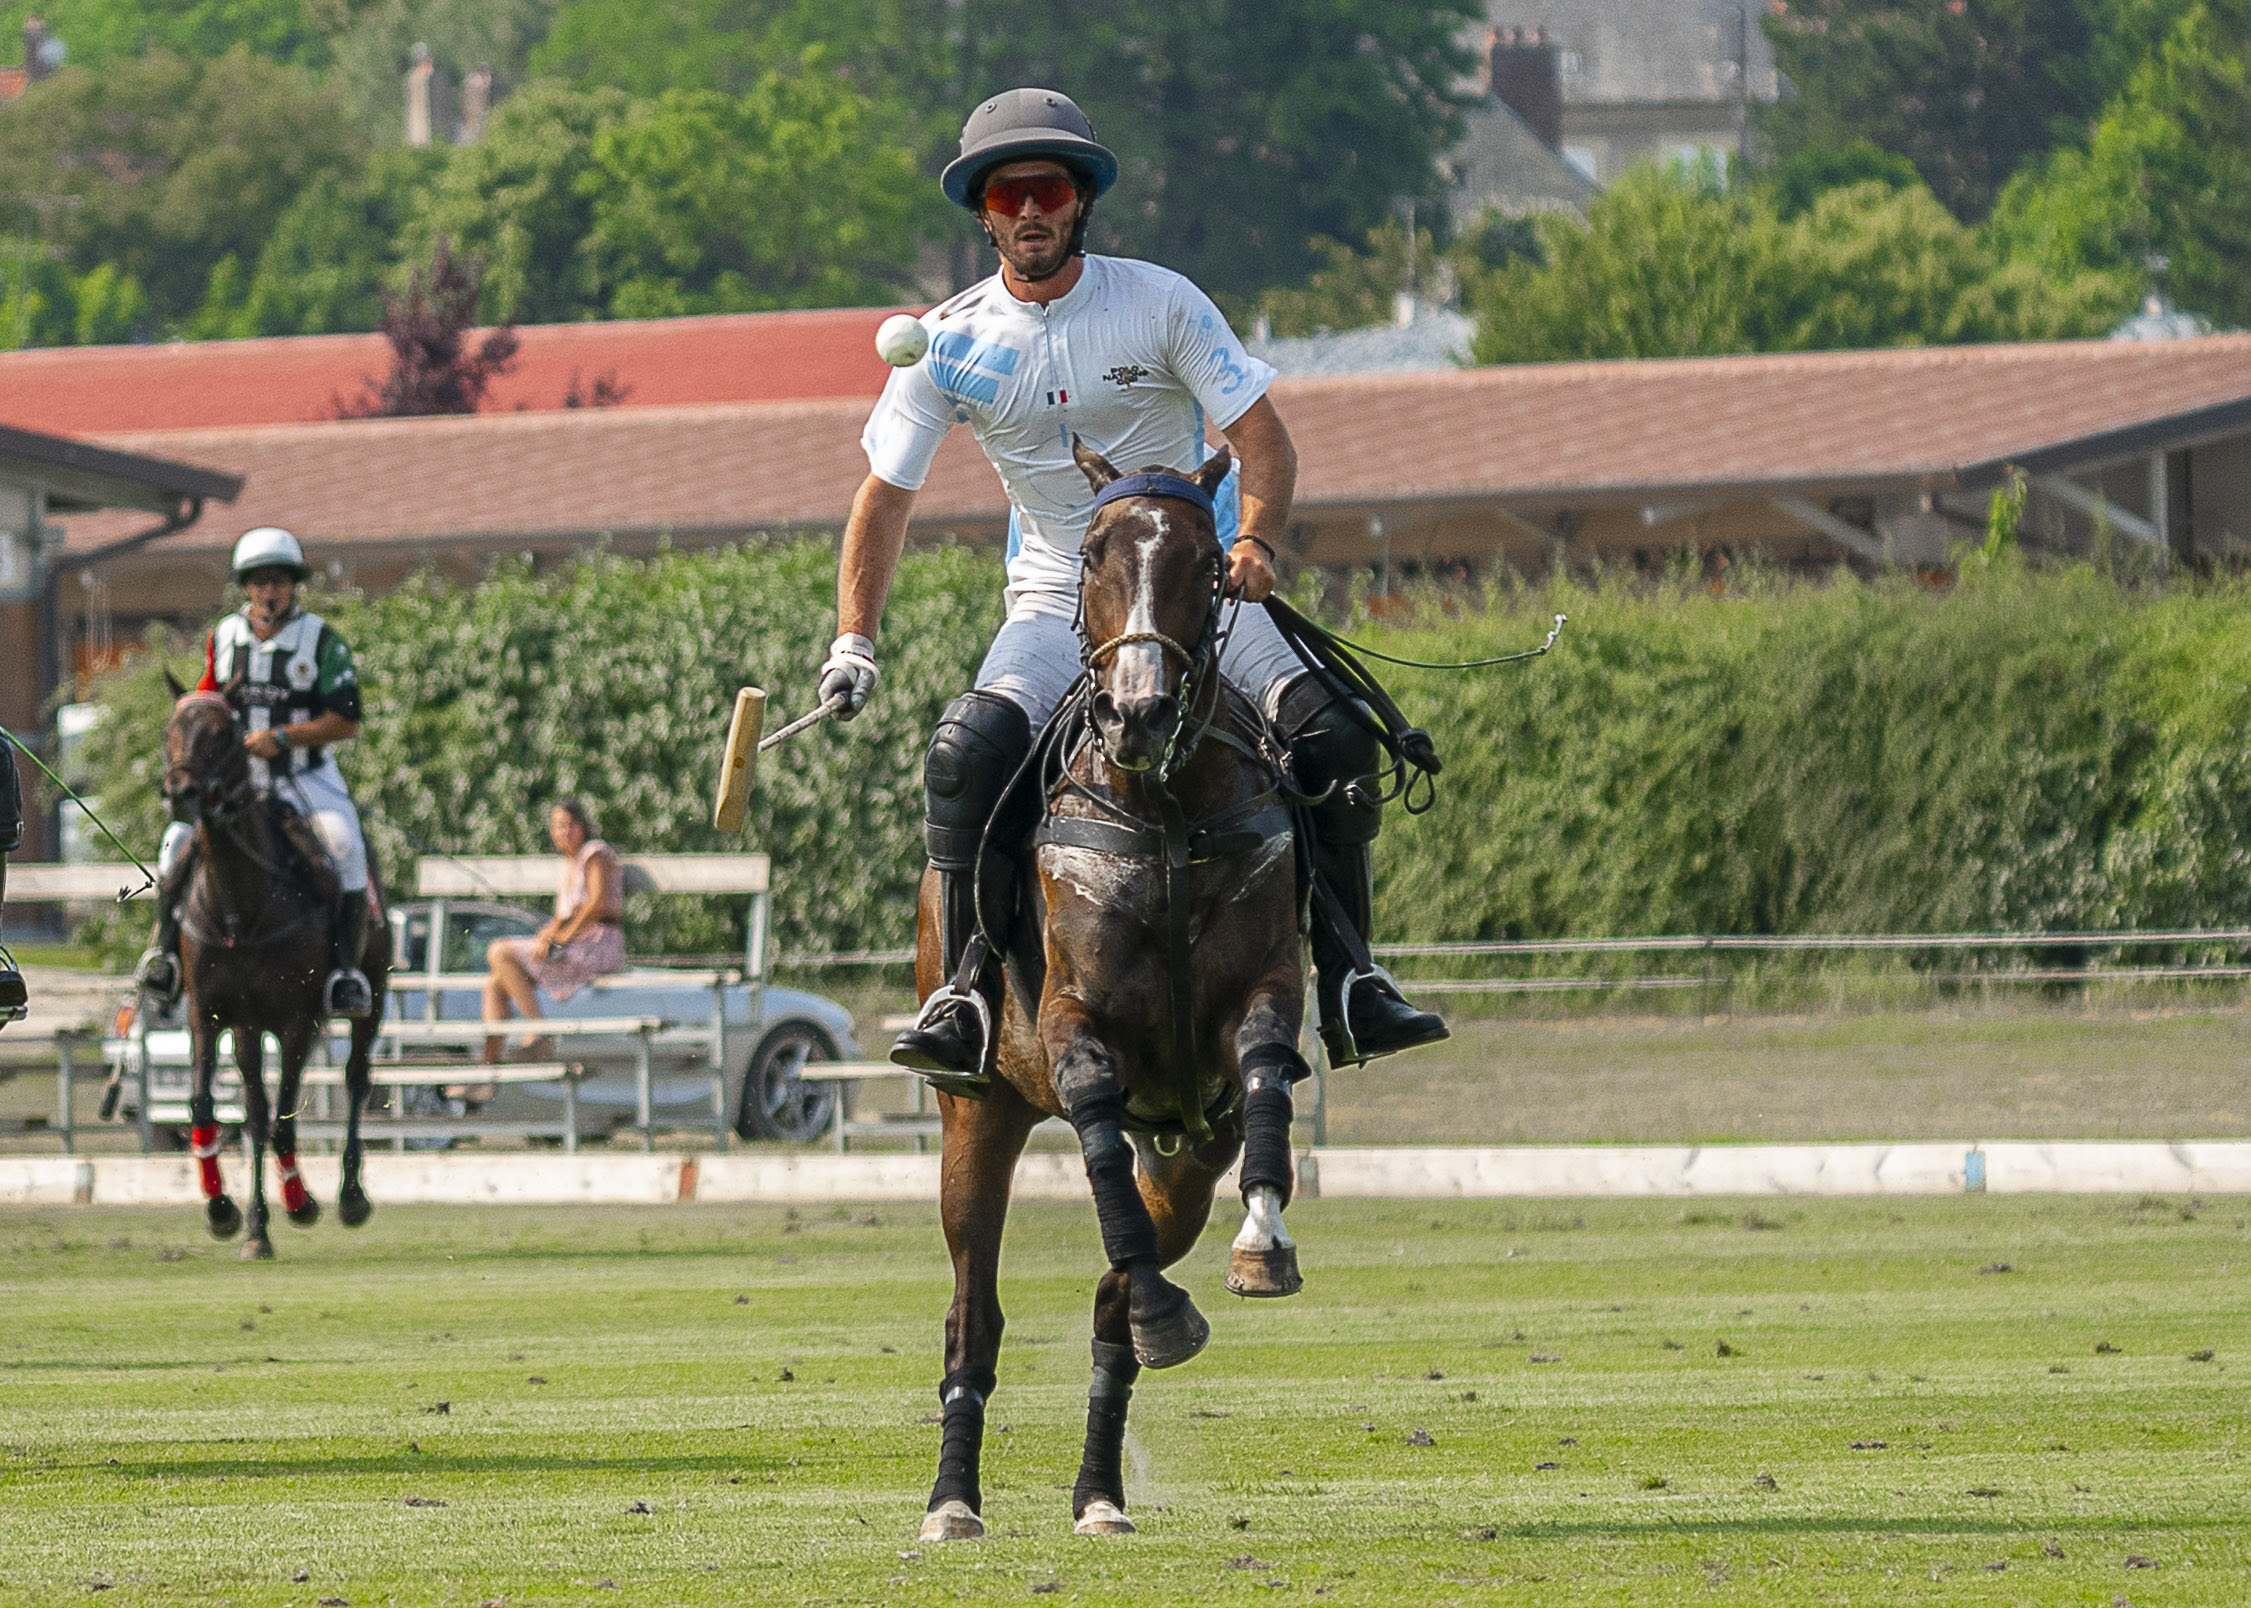 Last attack by Louis Jarrige (Hcp 4) - France PACA - towards the (golden) goal, giving the PACA region victory in overtime © R&B Presse - Adèle Renauldon - Polo Natioms Cup - Polo Club du Domaine de Chantilly